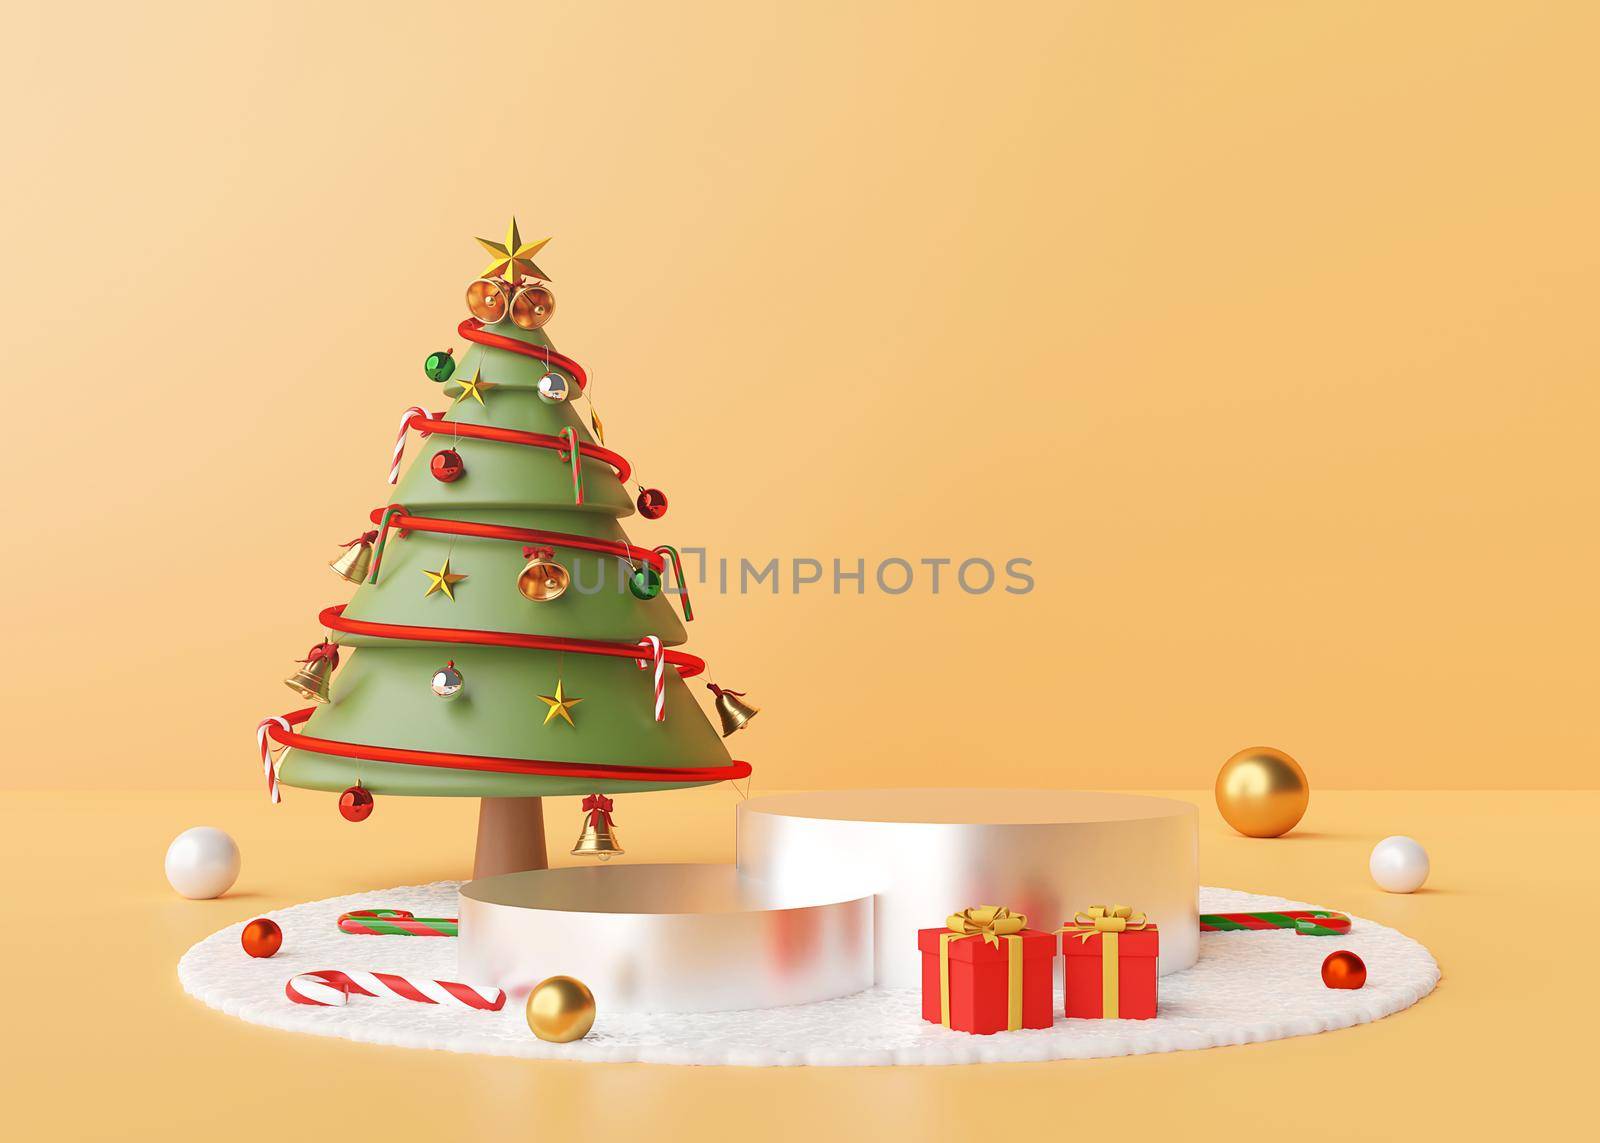 Merry Christmas, Podium with Christmas tree and ornaments on a snow floor, 3d rendering by nutzchotwarut